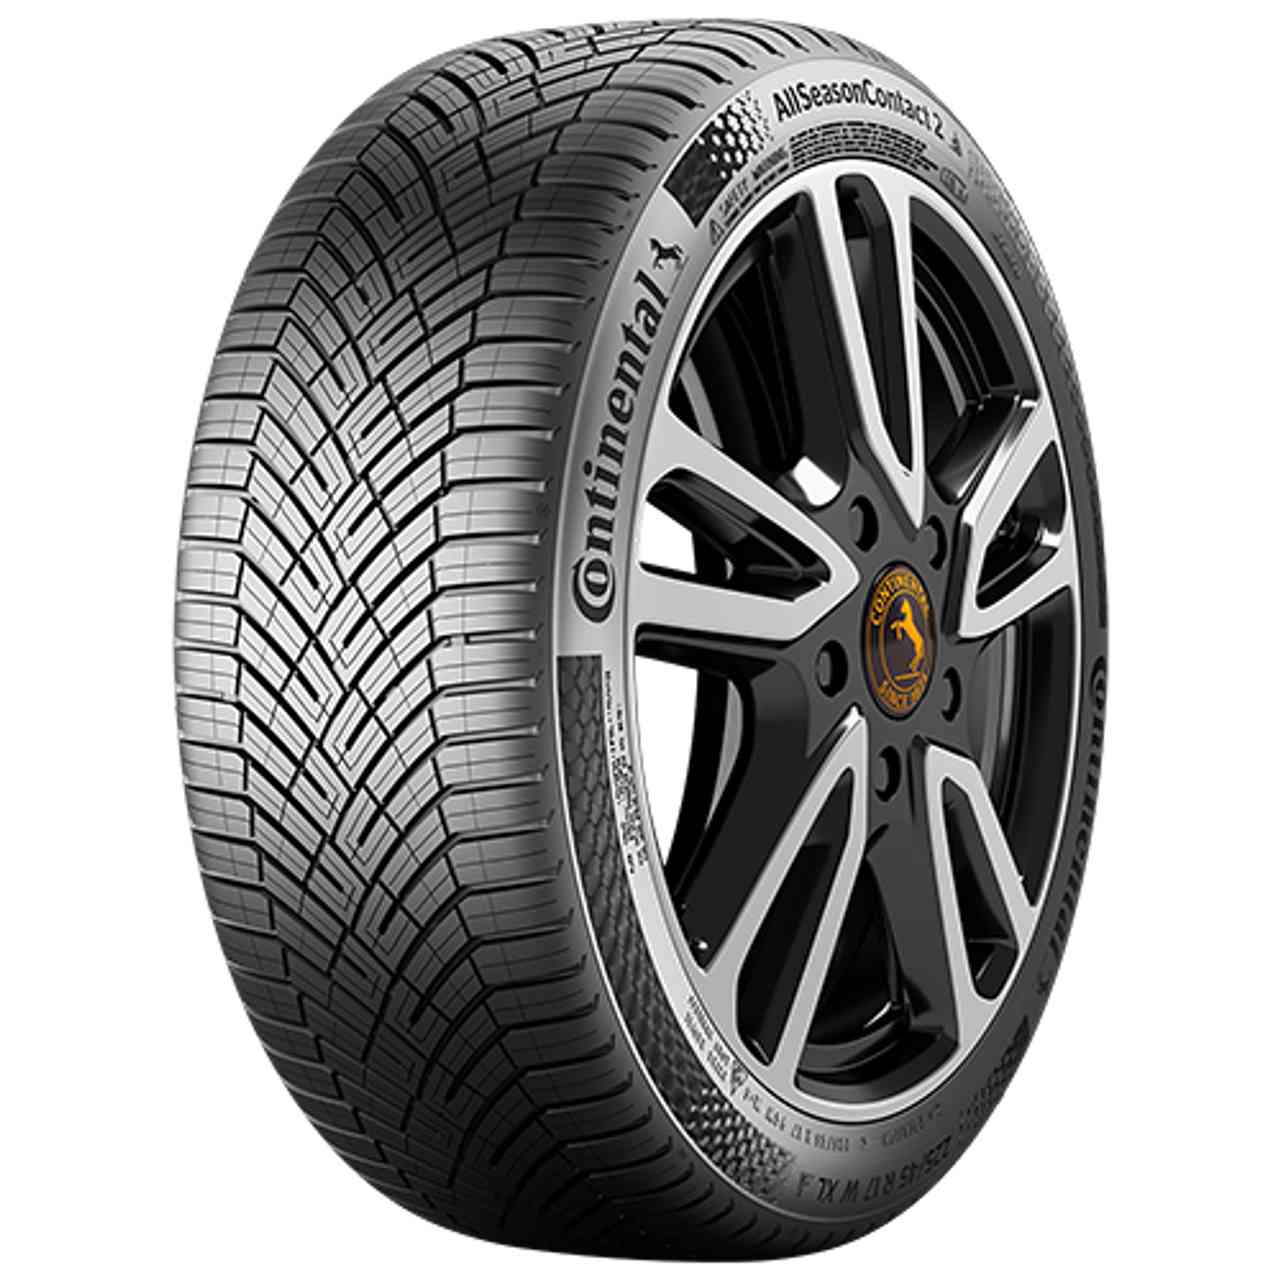 CONTINENTAL ALLSEASONCONTACT 2 (EVc) 215/50R19 93T FR BSW